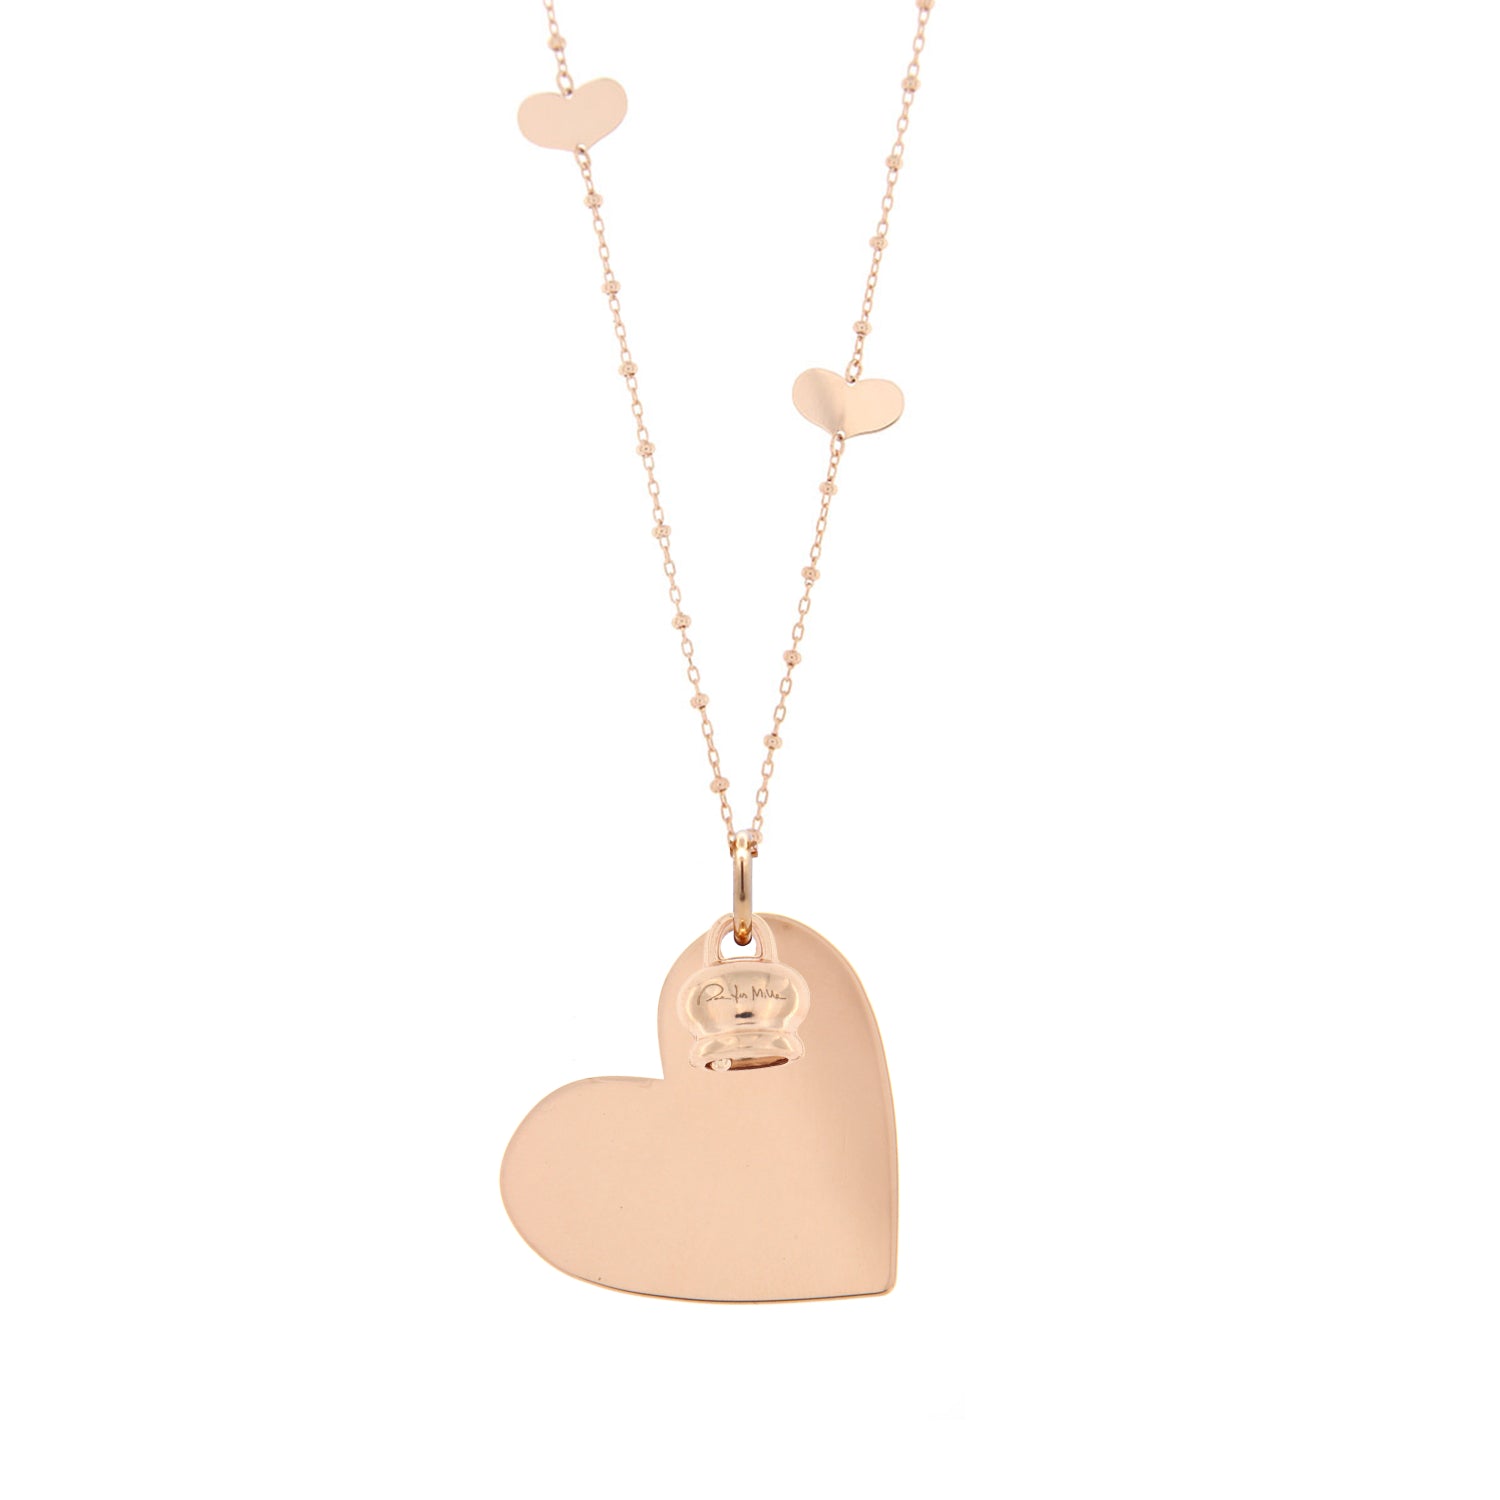 Heart Inserts Necklace with Heart Pendant